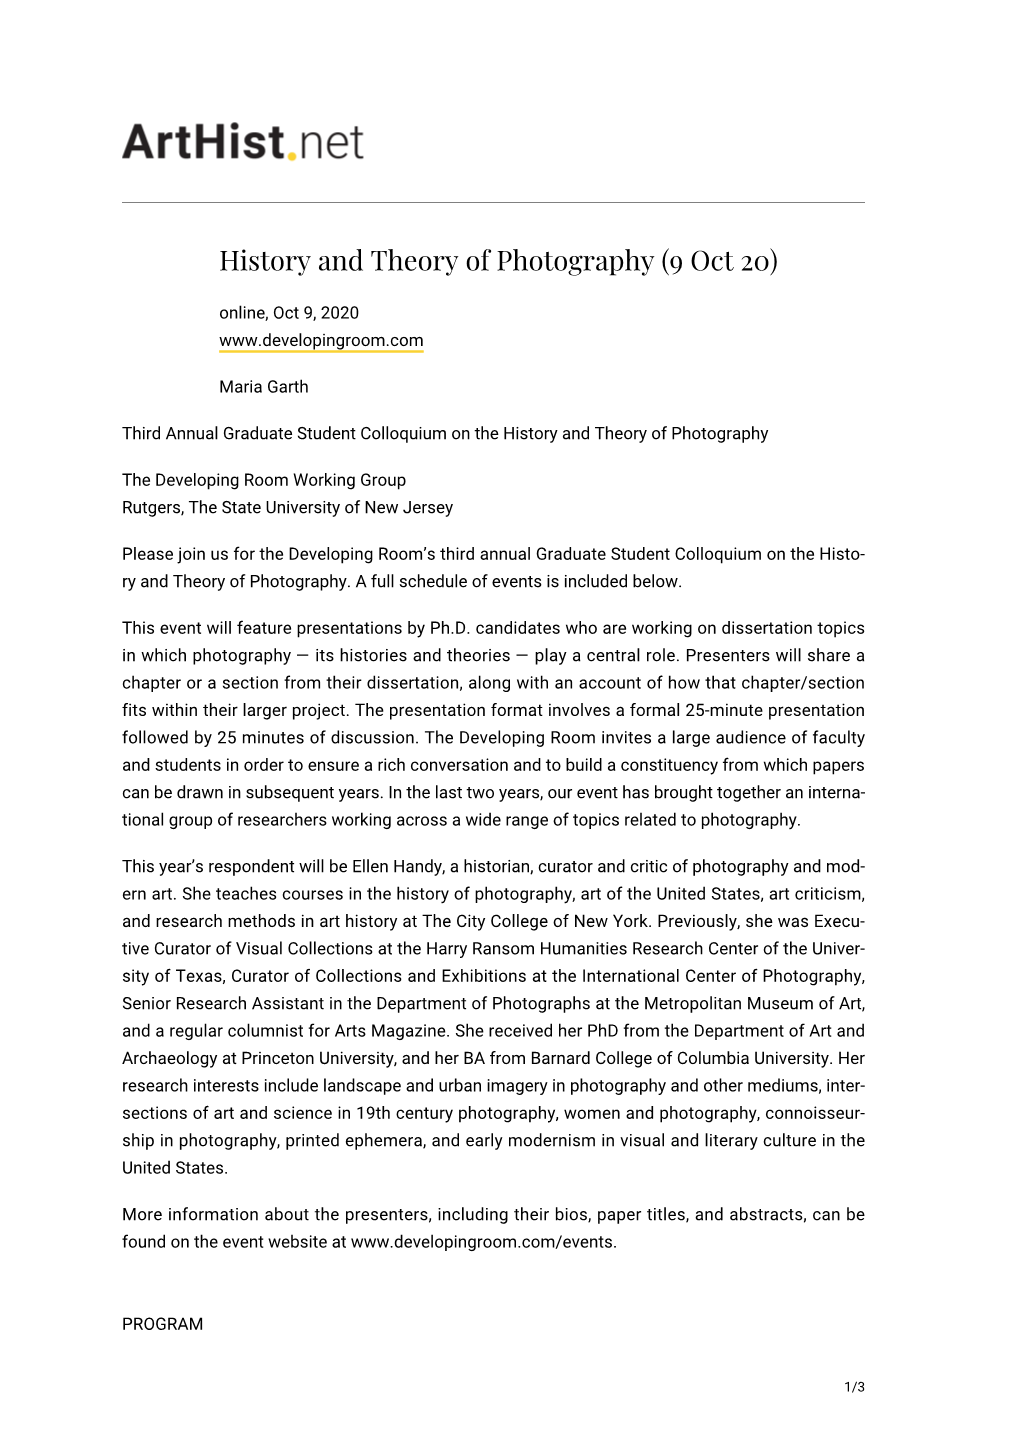 History and Theory of Photography (9 Oct 20)